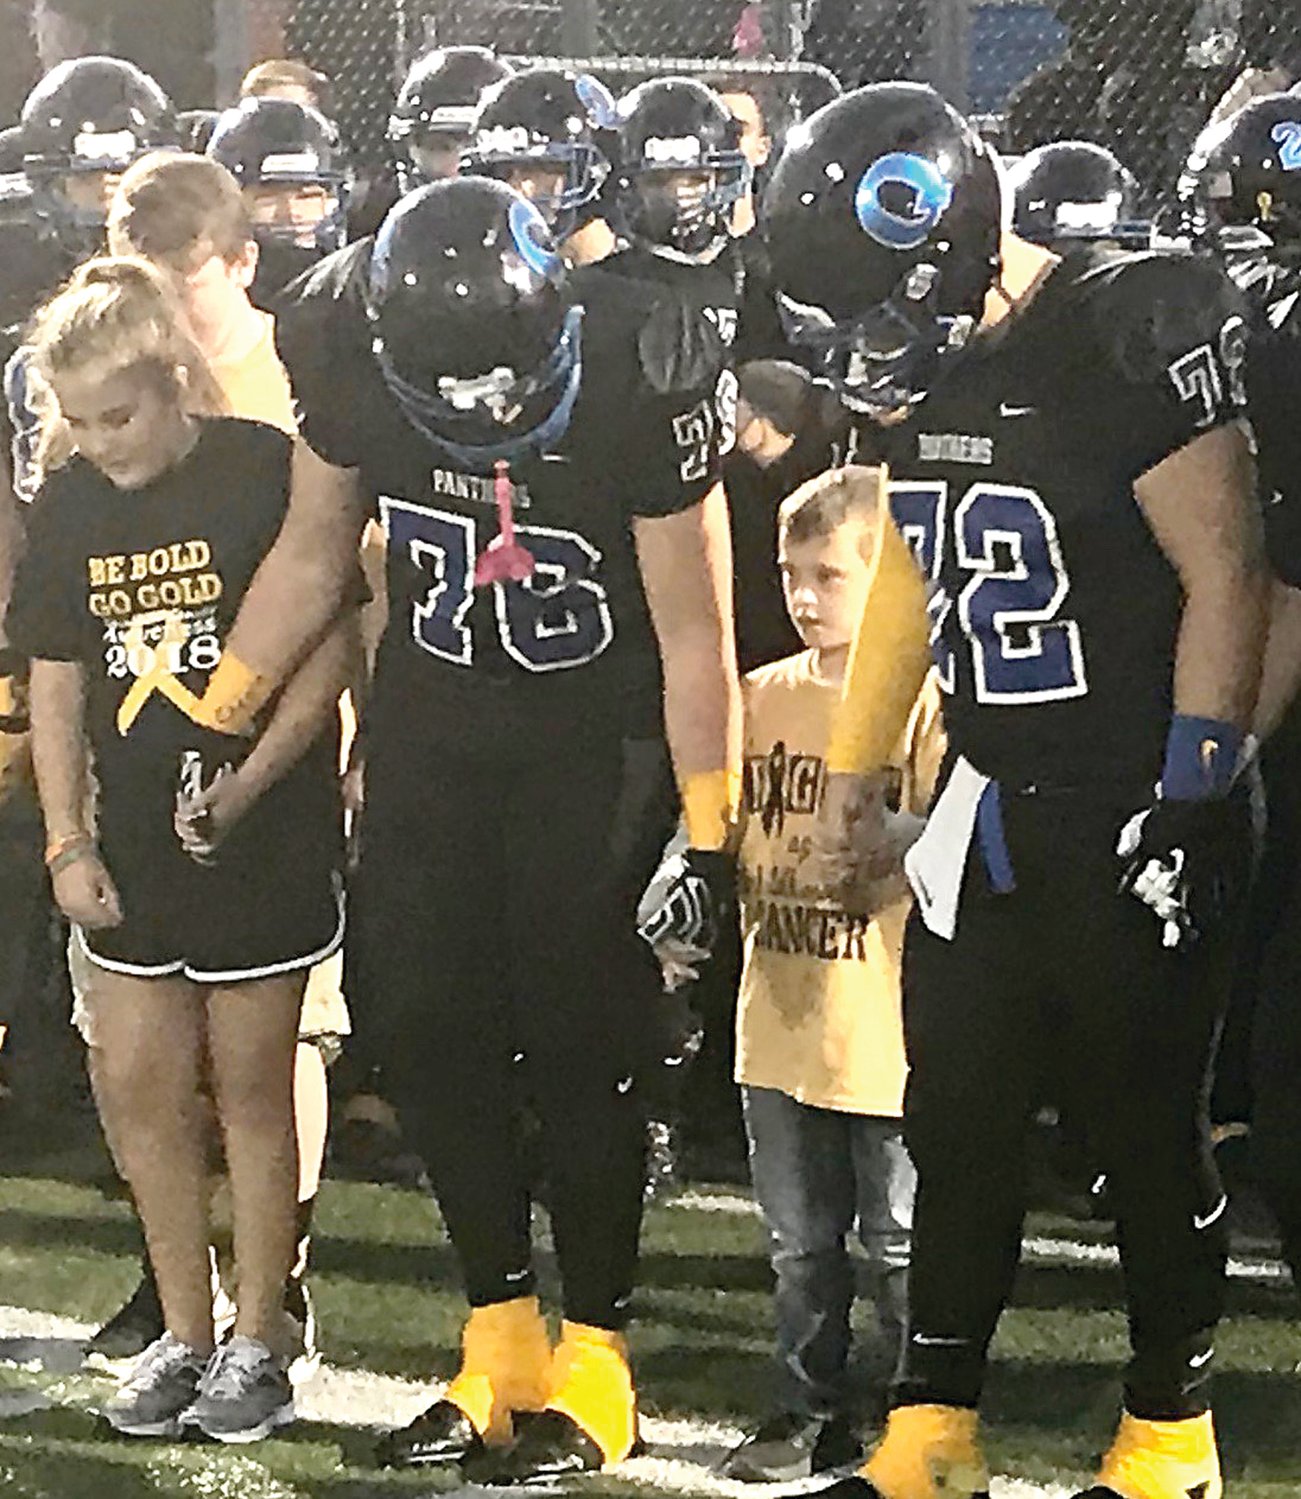 Quakertown Community High School football captains Logan Banas, No. 72, and Shawn Newswanger get ready to walk to midfield for the coin toss with Maddie Willing, left, and Rhiley Coughlin. Last Friday was not only Quakertown’s 500th win, but also Childhood Cancer Awareness Night. Read more about the team’s and school community’s efforts to raise awareness on page B3.